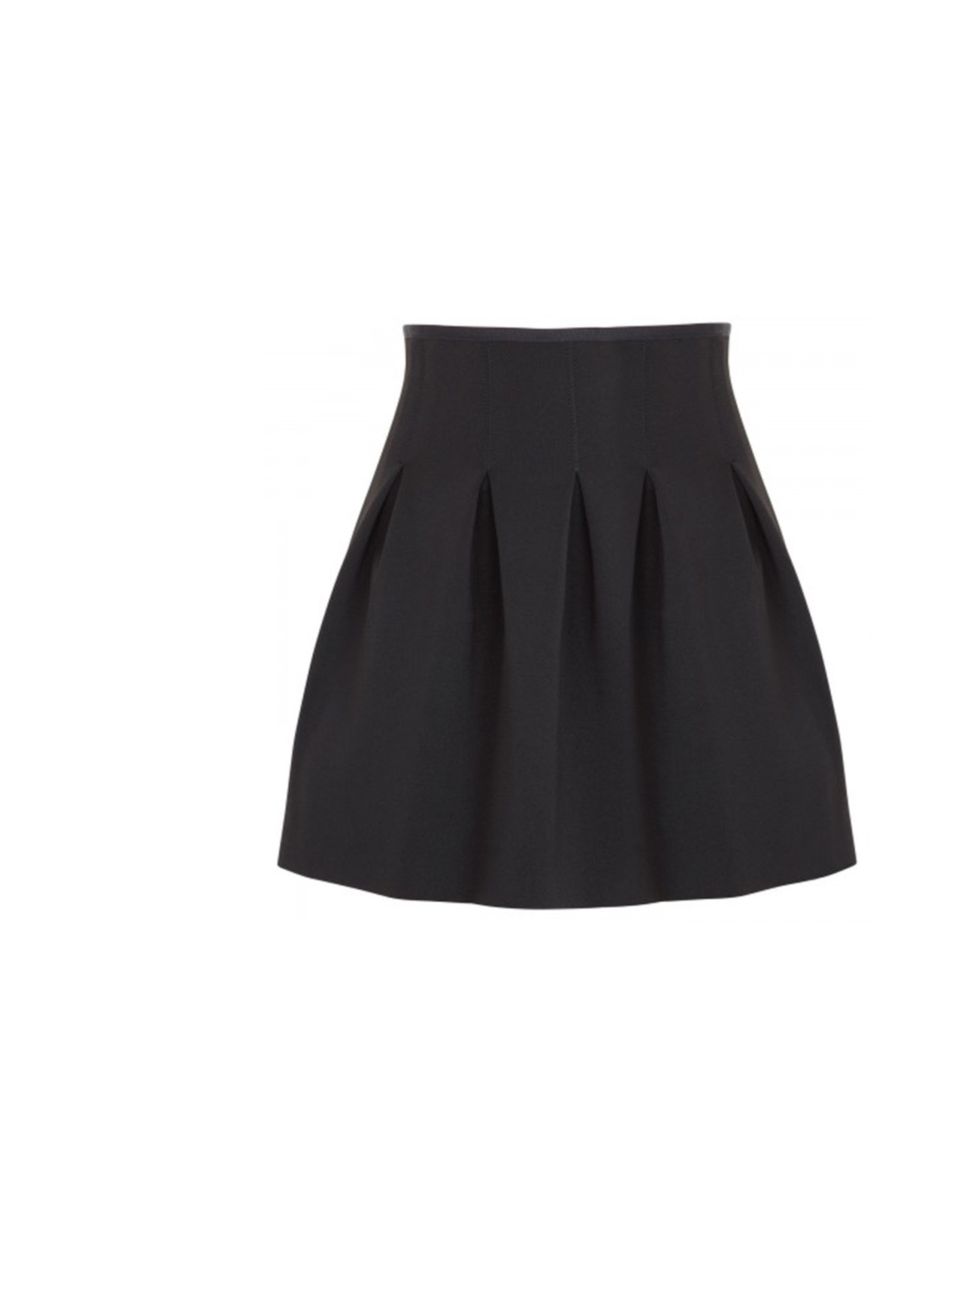 <p>Neoprene is having a moment. And trust us, it isnt as scary as it sounds. This simple yet directional T By Alexander Wang skirt is a case in point T by Alexander Wang neoprene skirt, £195, at <a href="http://cseeboutique.com/skirts/t-by-alexander-wan